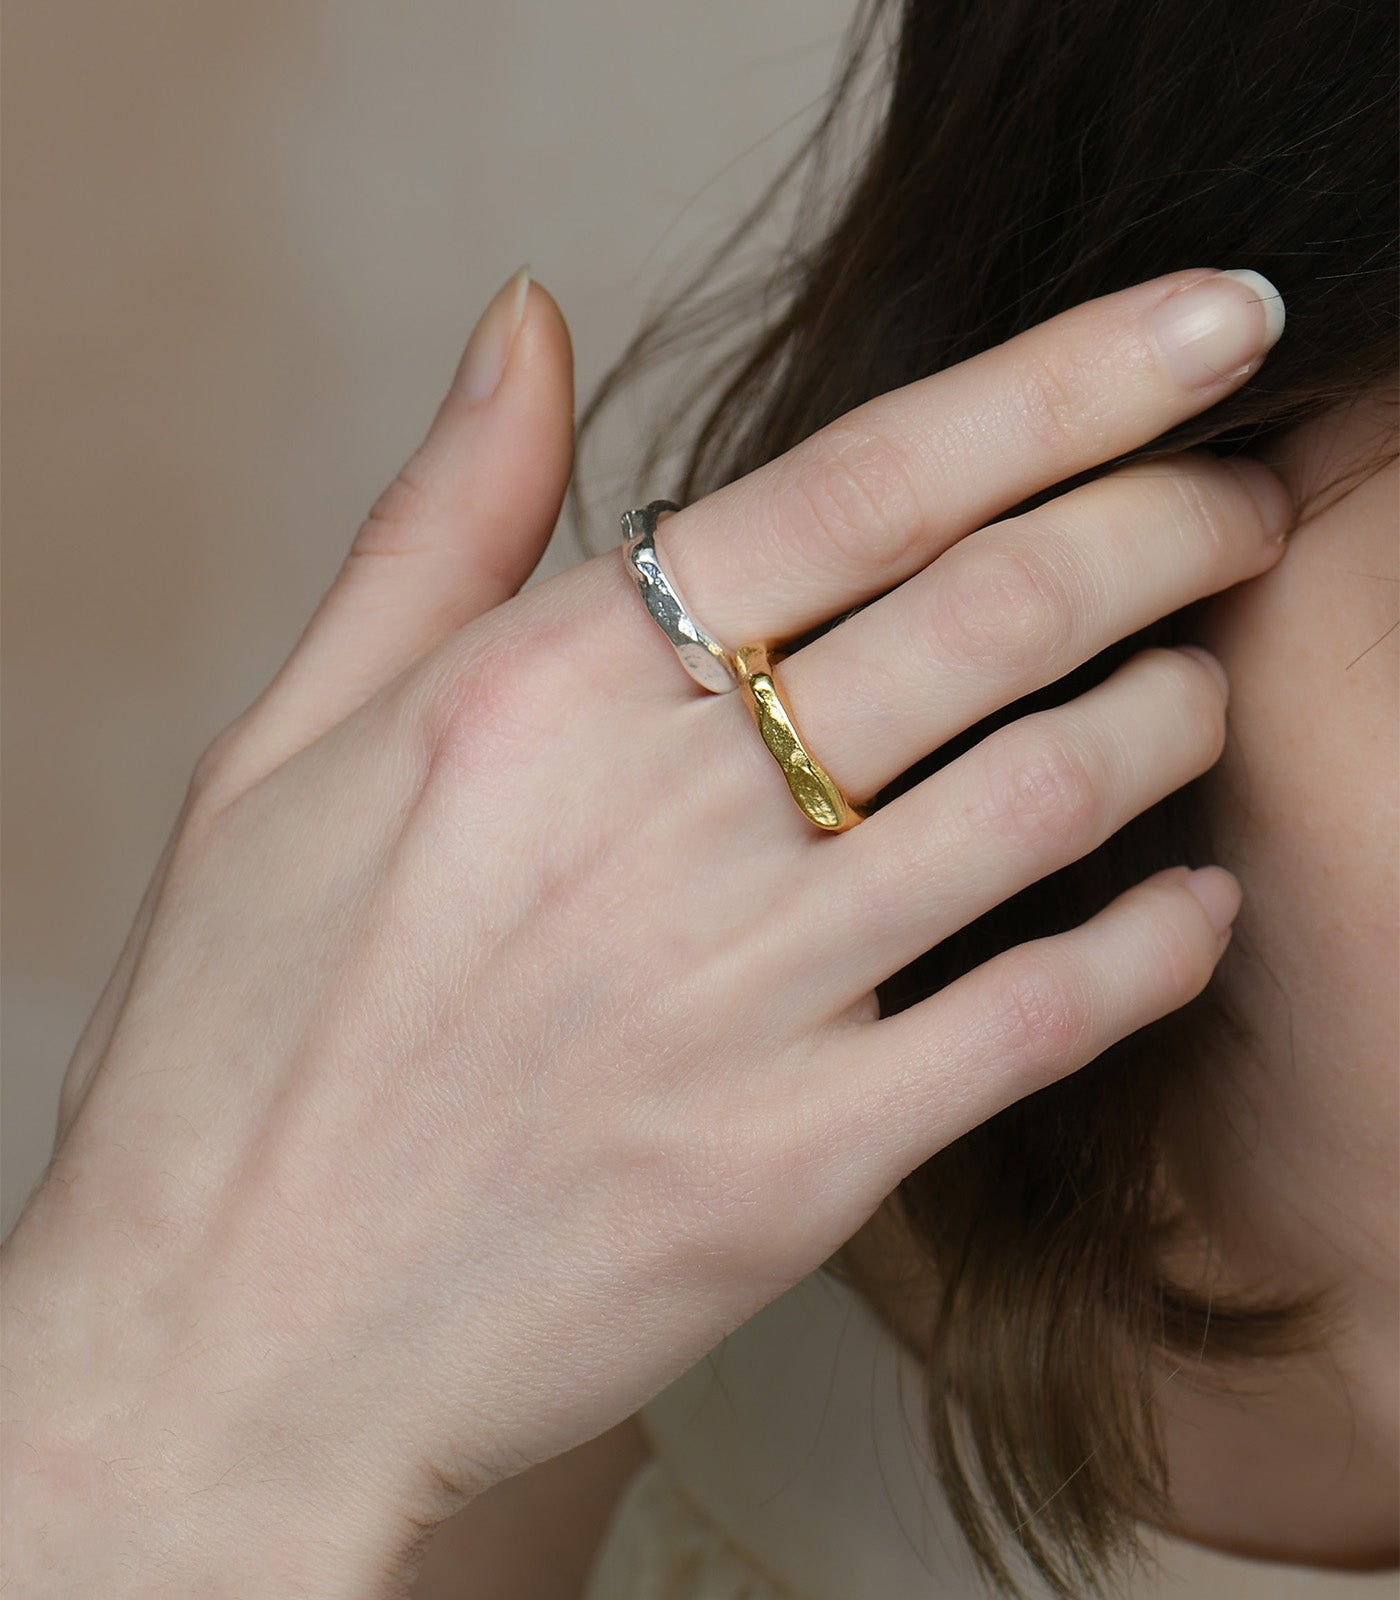 A model wears a sterling silver ring and gold vermeil ring with a chunky band and organic texture.